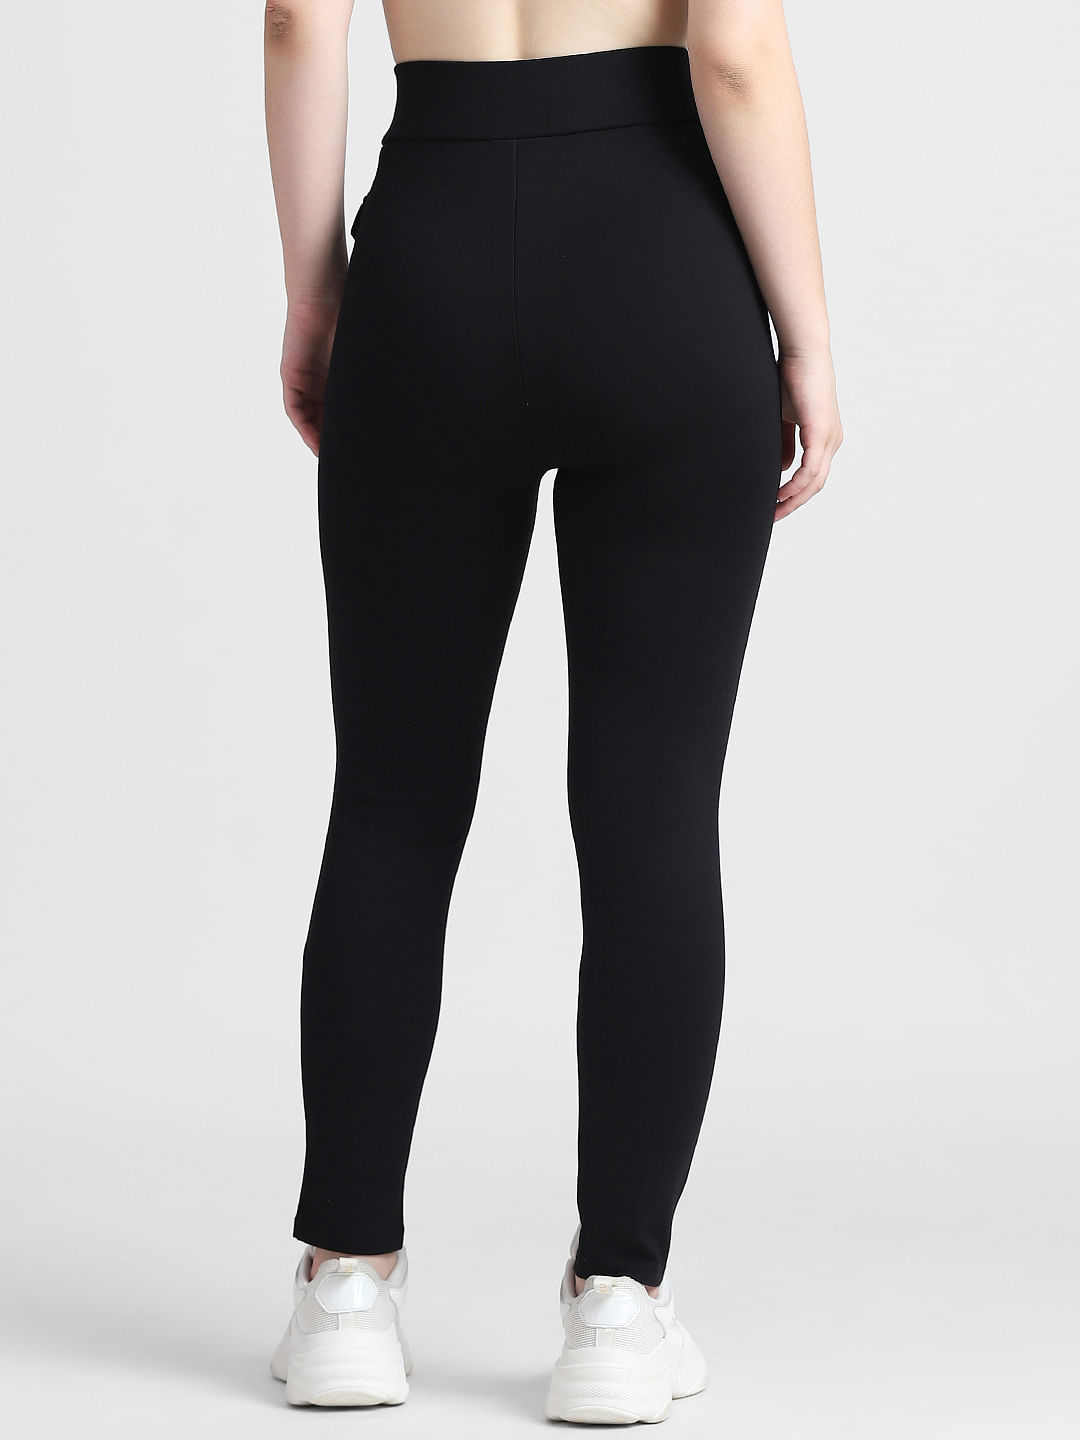 Women's On The Go-to Legging made with Organic Cotton | Pact